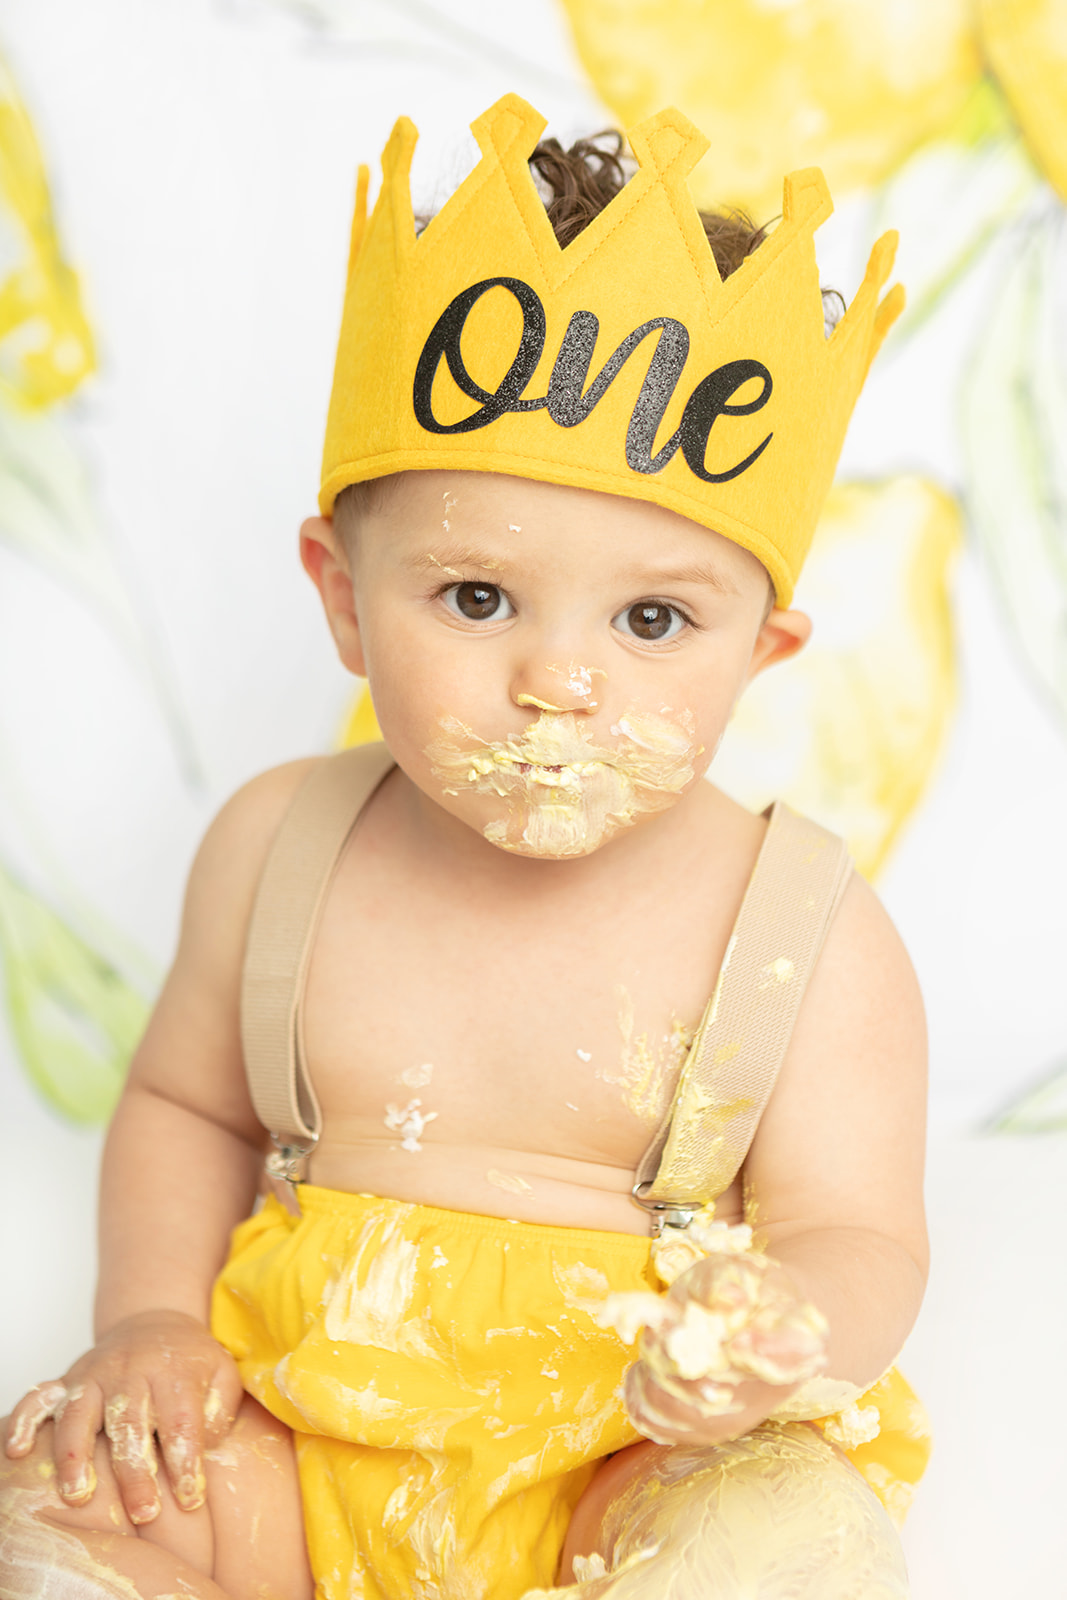 A little boy looks at the camera with a serious expression. He is wearing a golden yellow first birthday crown, suspenders, and yellow bloomers to match. He is absolutely covered in yellow lemon cake and frosting! In the background is a hand painted lemon backdrop by Heidi Hope.